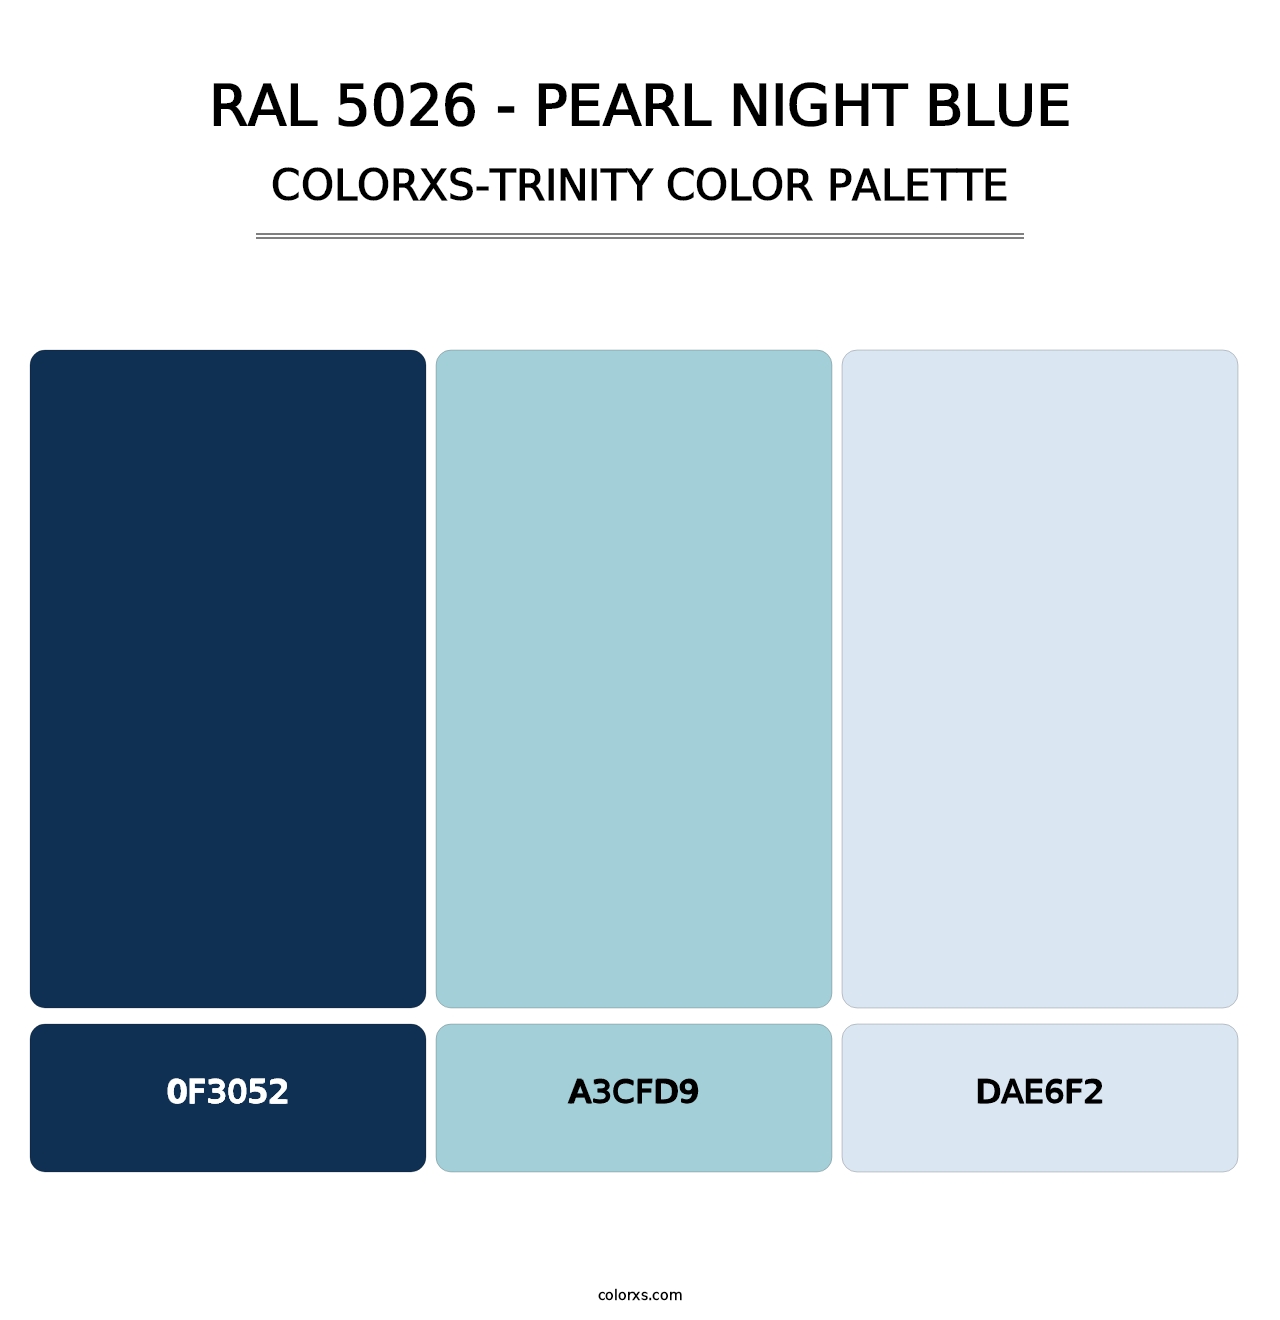 RAL 5026 - Pearl Night Blue - Colorxs Trinity Palette